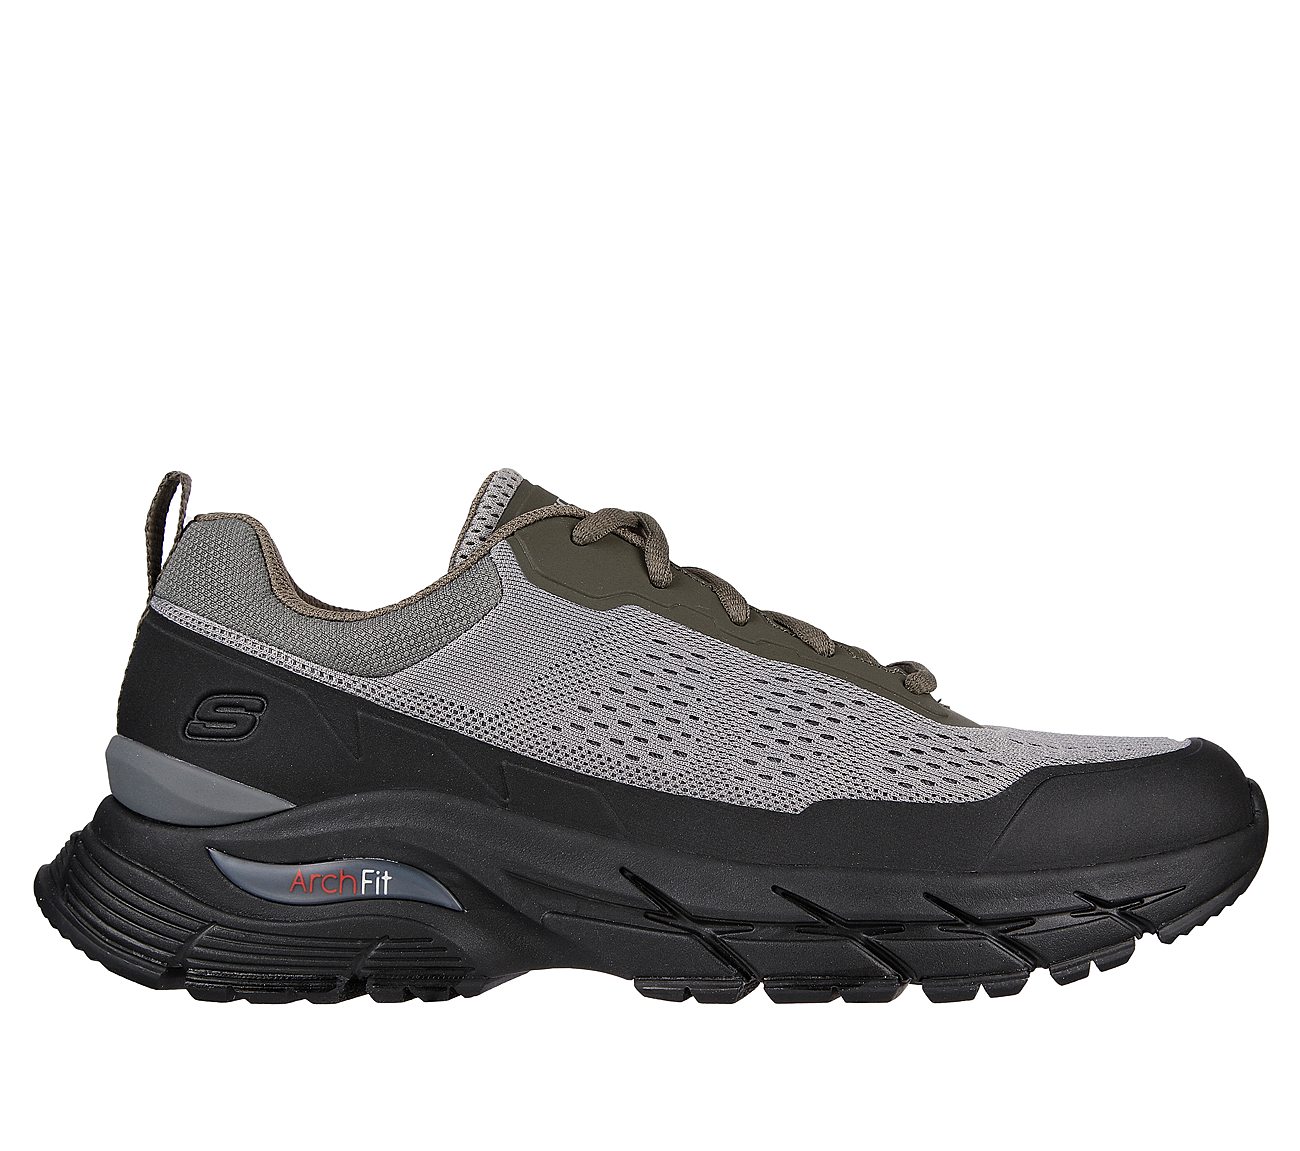 ARCH FIT BAXTER - PENDROY, GREY/BLACK Footwear Lateral View